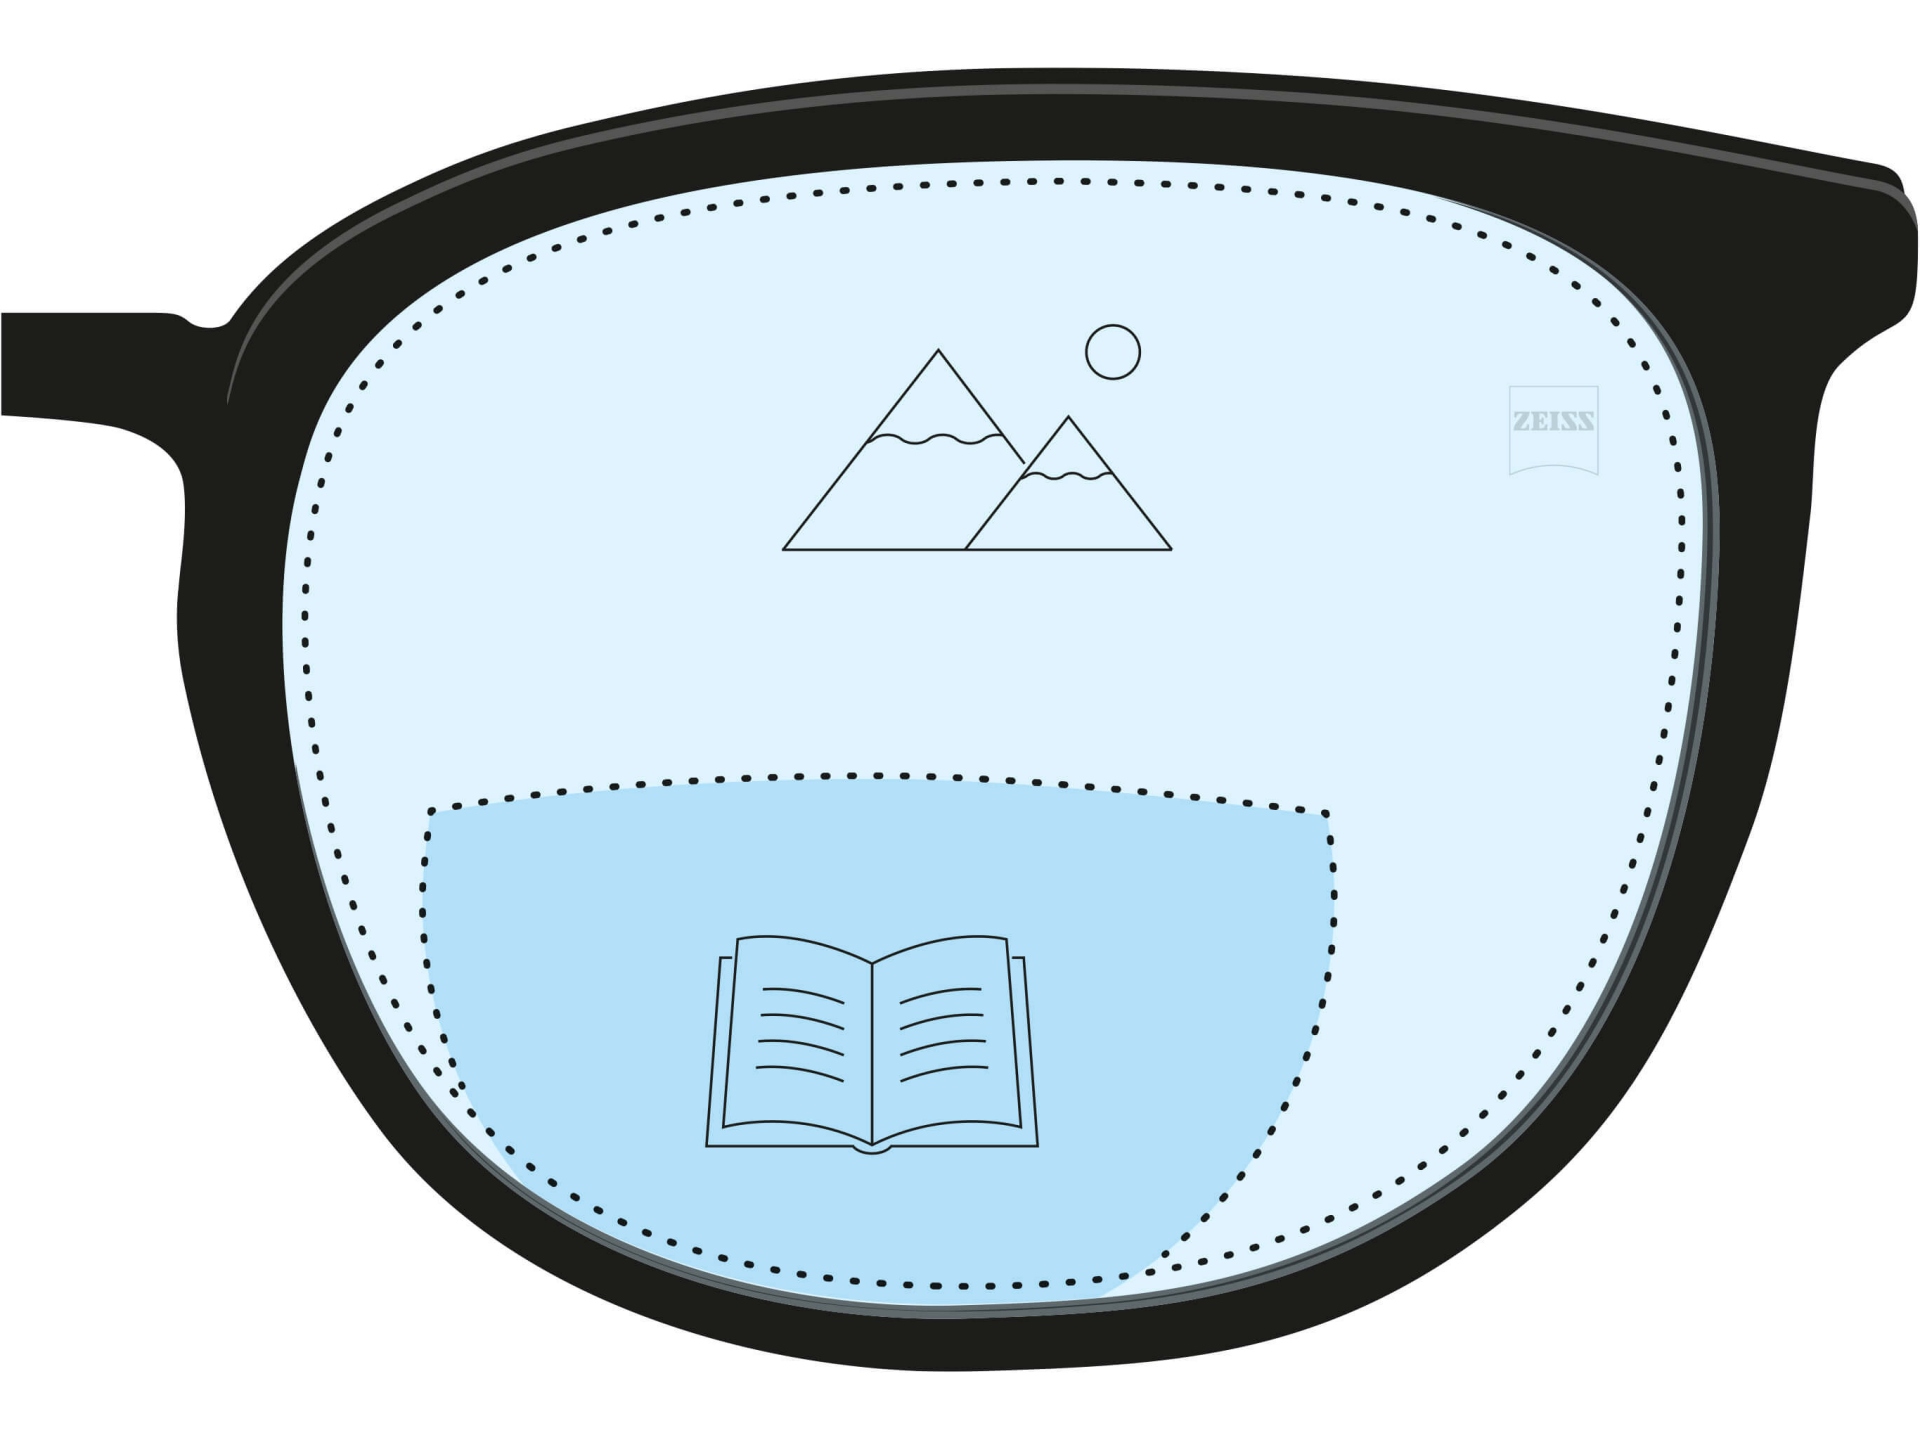 An illustration of a bifocal lens. A dark blue area indicates the reading zone, while a light blue part of the lens indicates the distance zone.